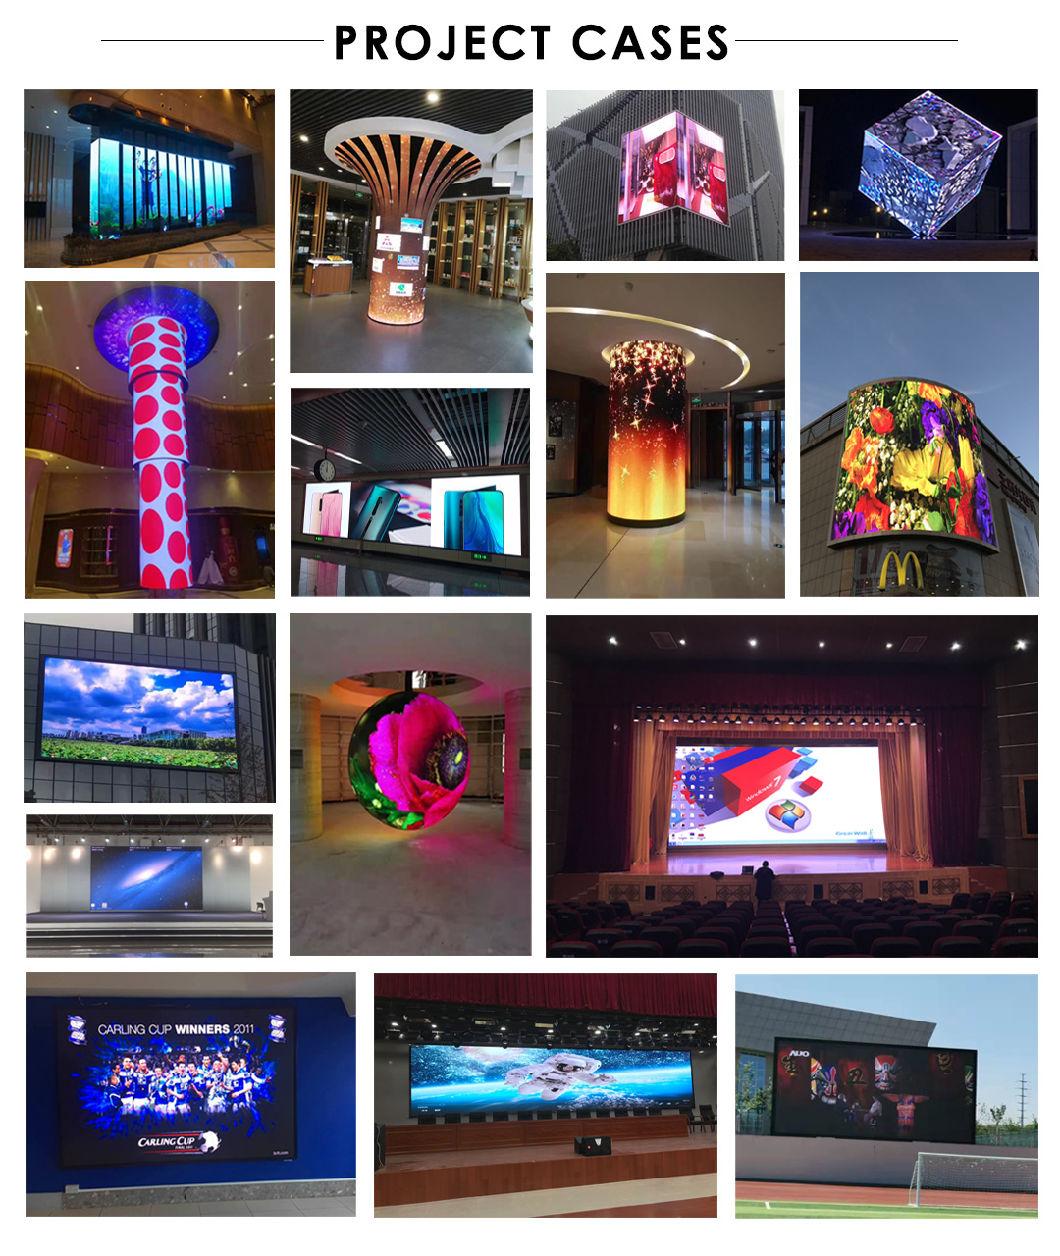 Building Curtain Wall Window Glass Transparent LED Display Screen P3.91-7.81